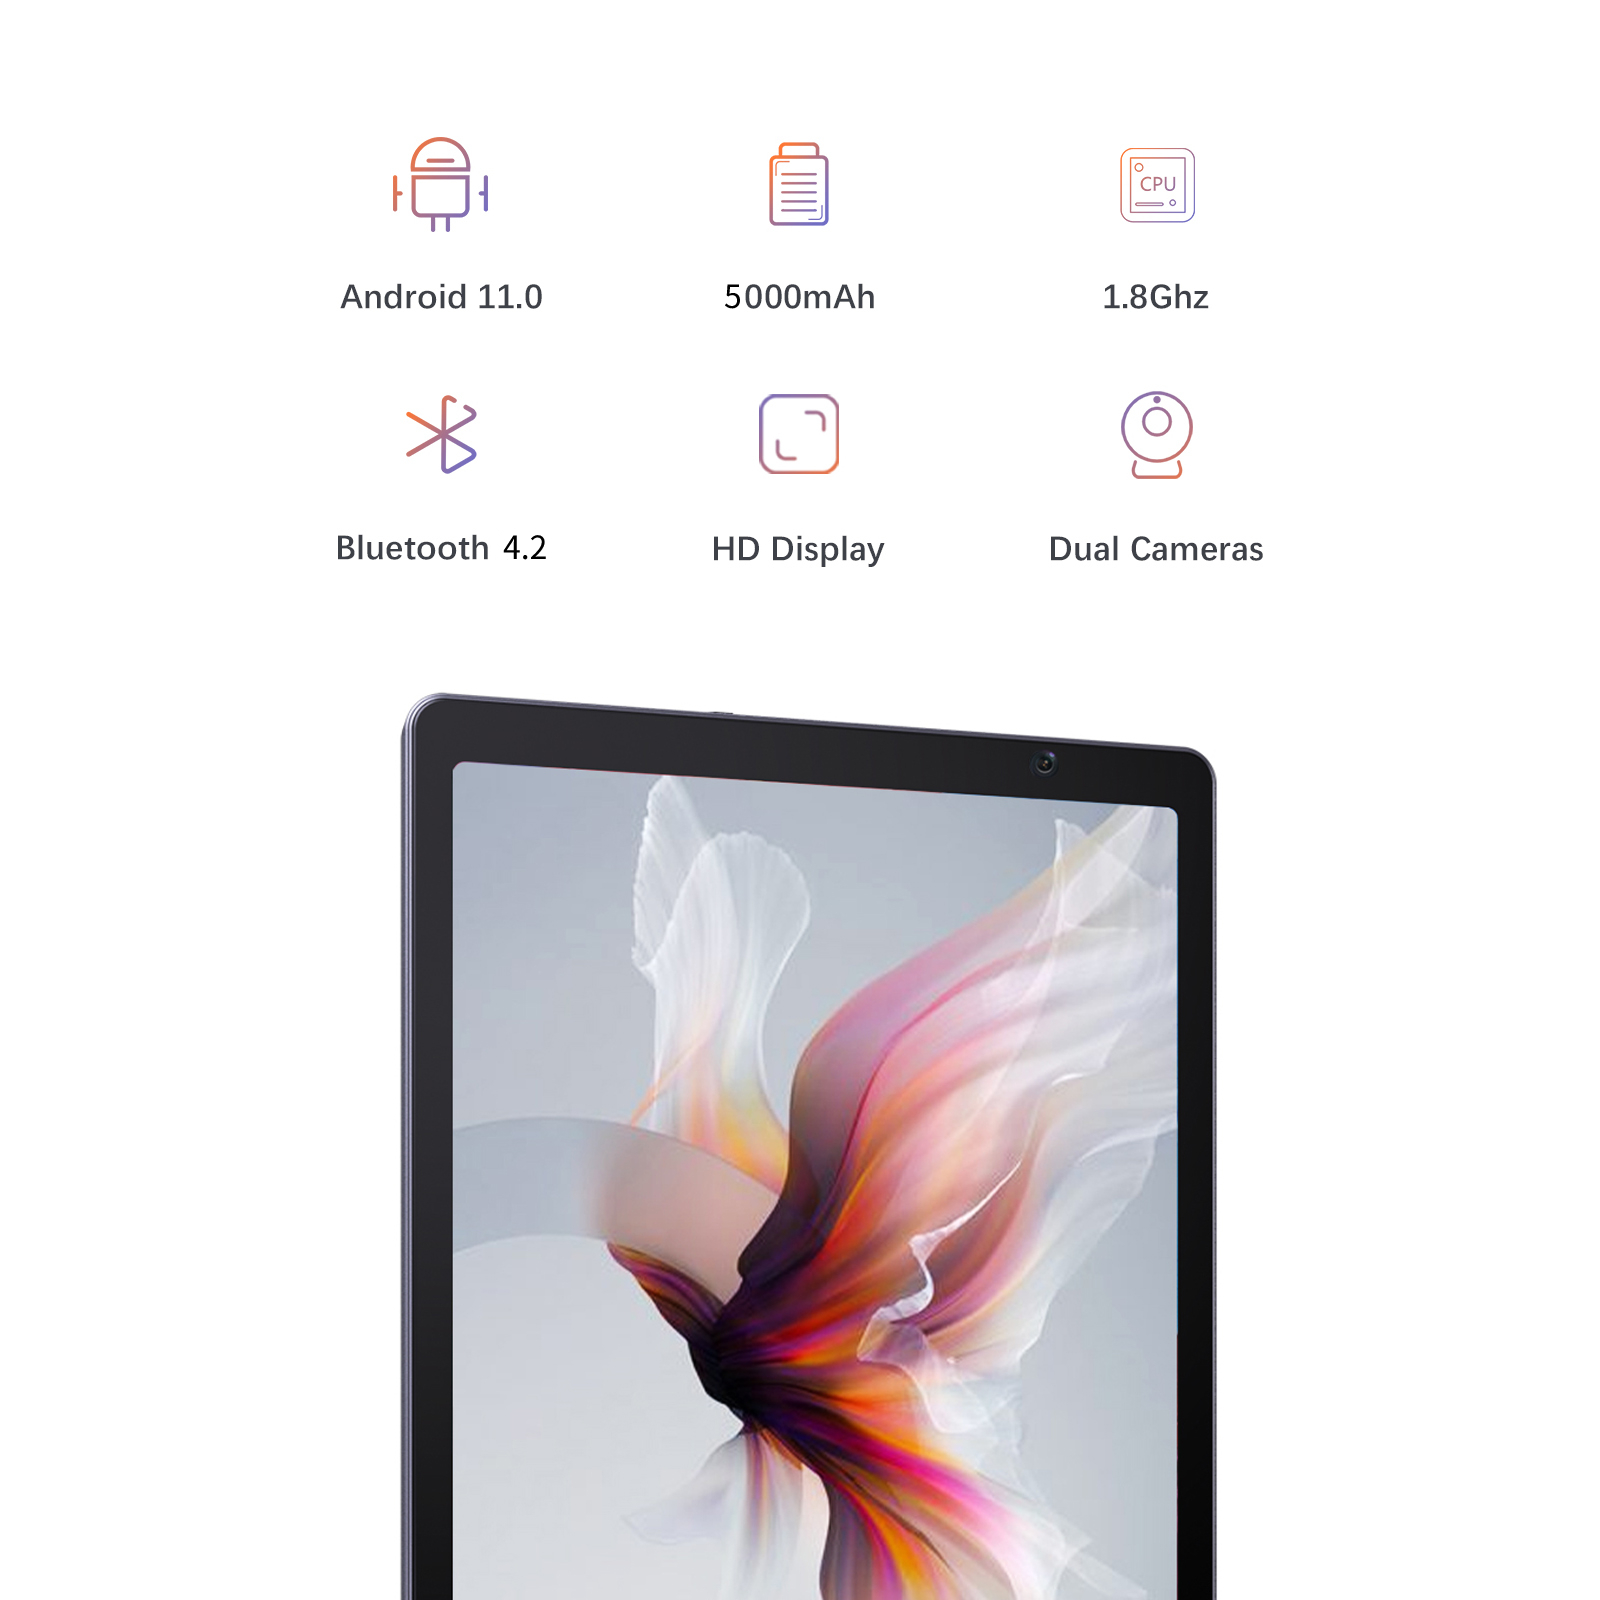 MAGCH T10 10.1 inch Tablet, Android 11.0, 3GB RAM, 32GB ROM, Quad-Core Processor, Up to 1.8Ghz, 8MP Rear Camera, HD IPS Display, 5000mAh, Wi-Fi, Bluetooth 4.2, Metal Body, Grey